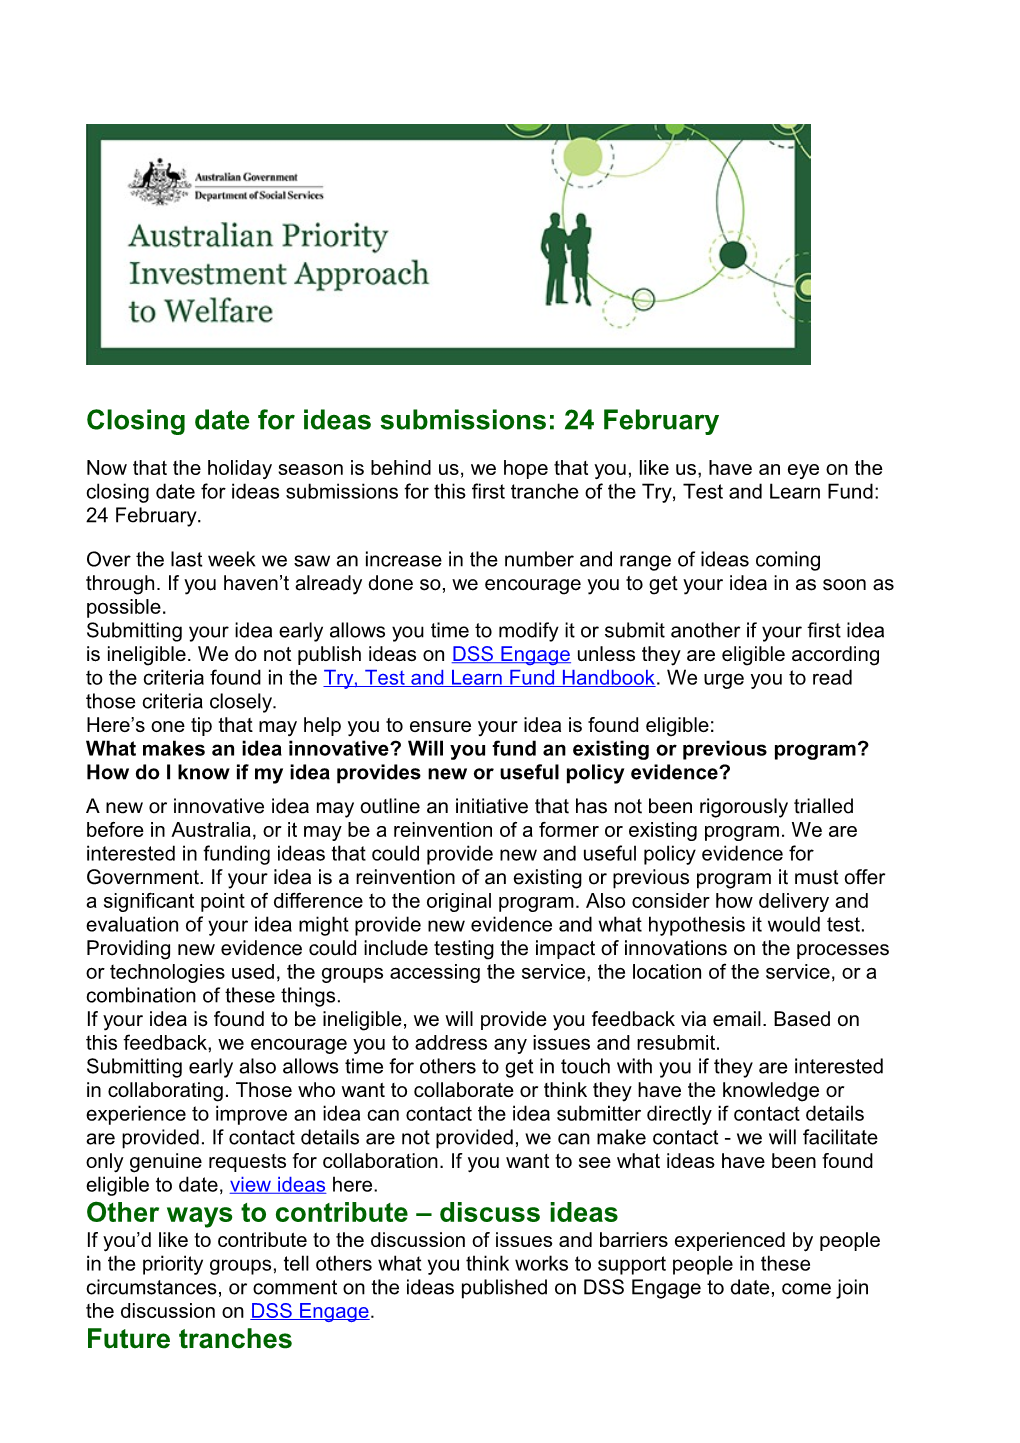 Closing Date for Ideas Submissions: 24 February